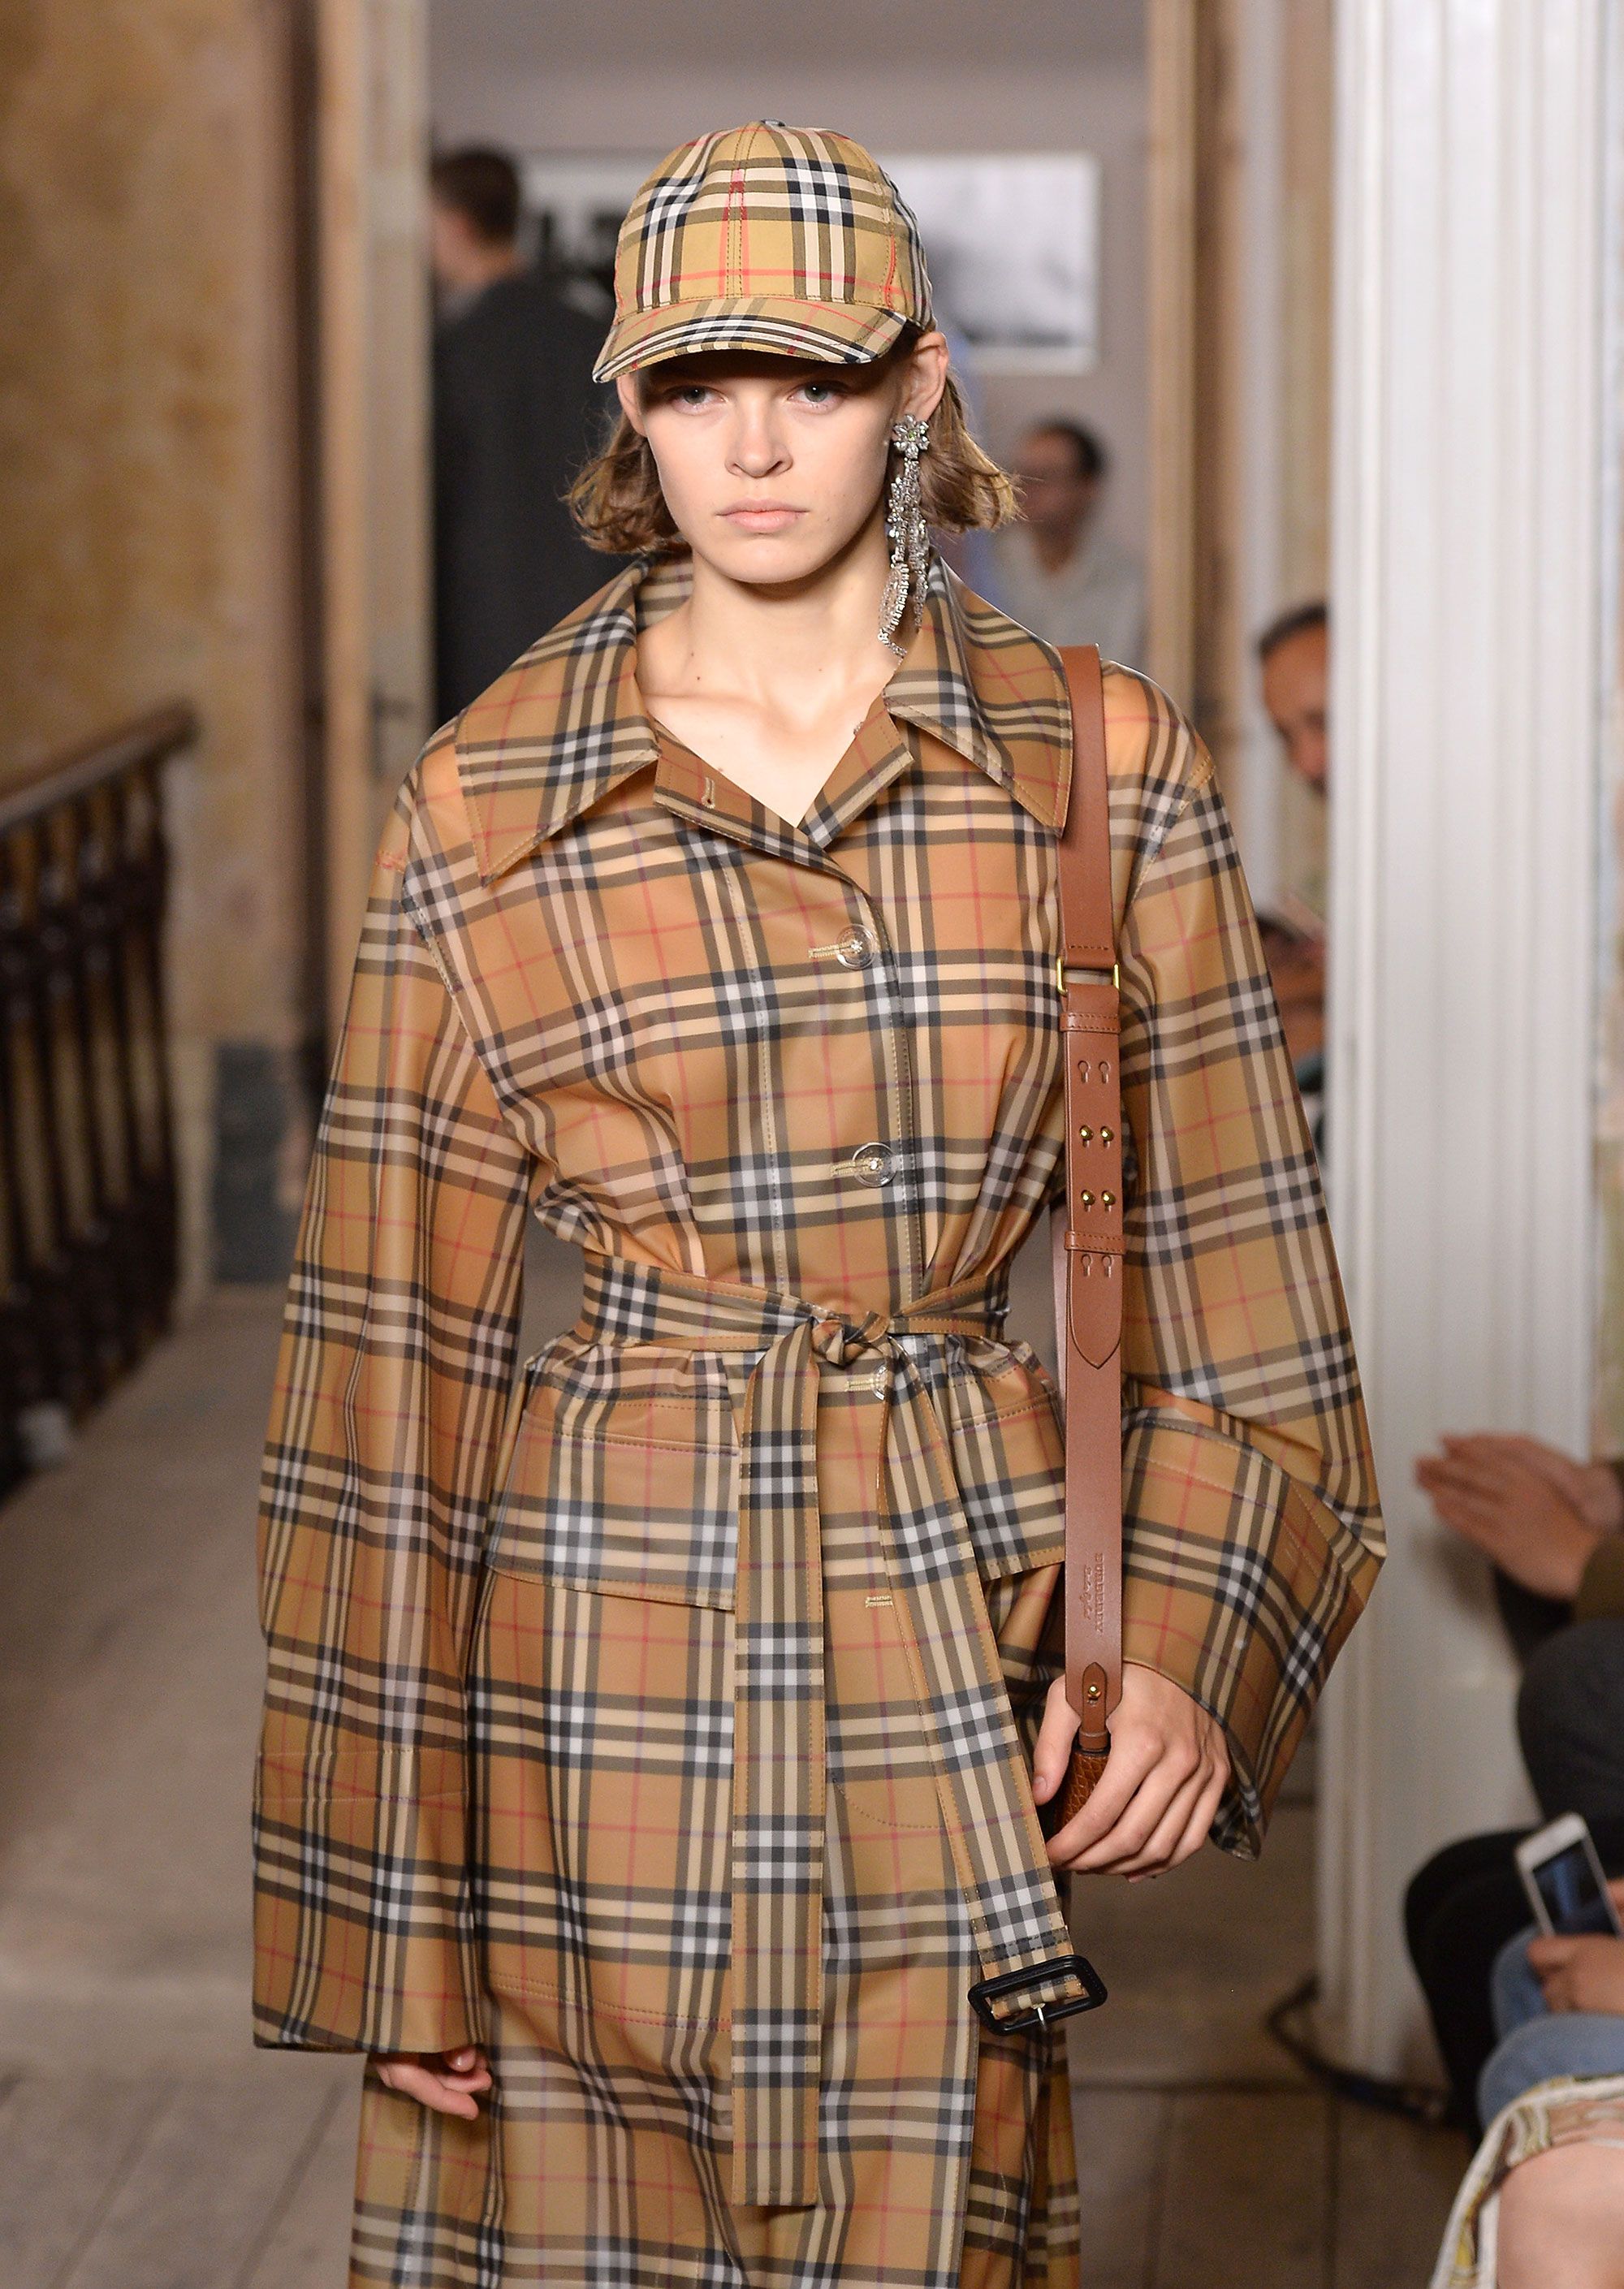 Burberry burns unsold products worth £28.6 million to guard